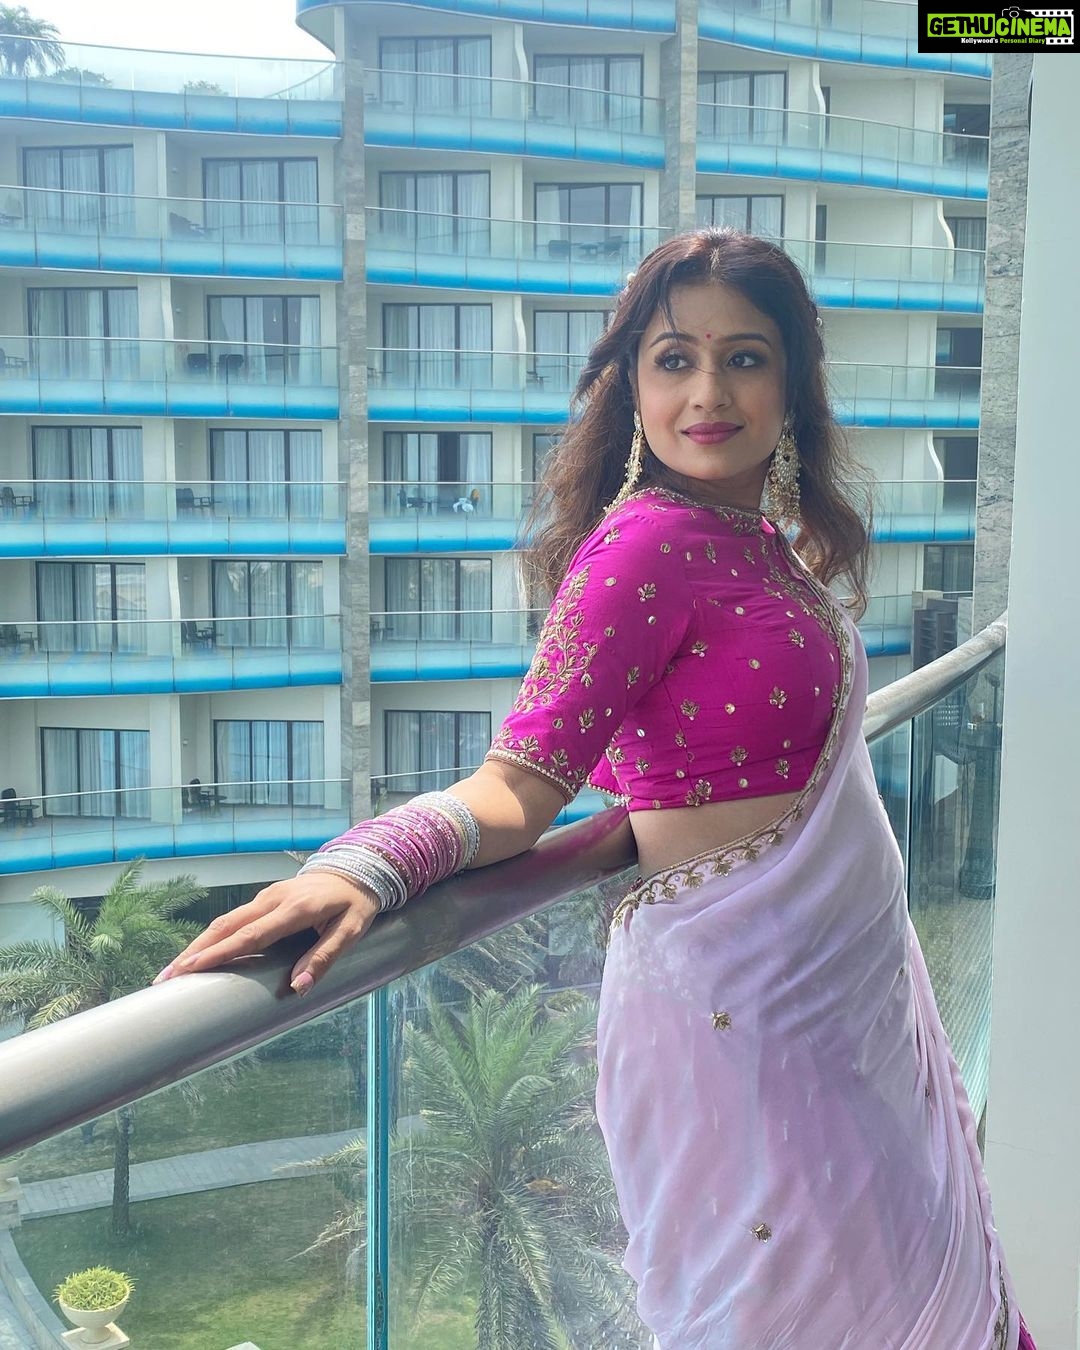 Paridhi Sharma Wiki, Biography, Age, Gallery, Spouse and more